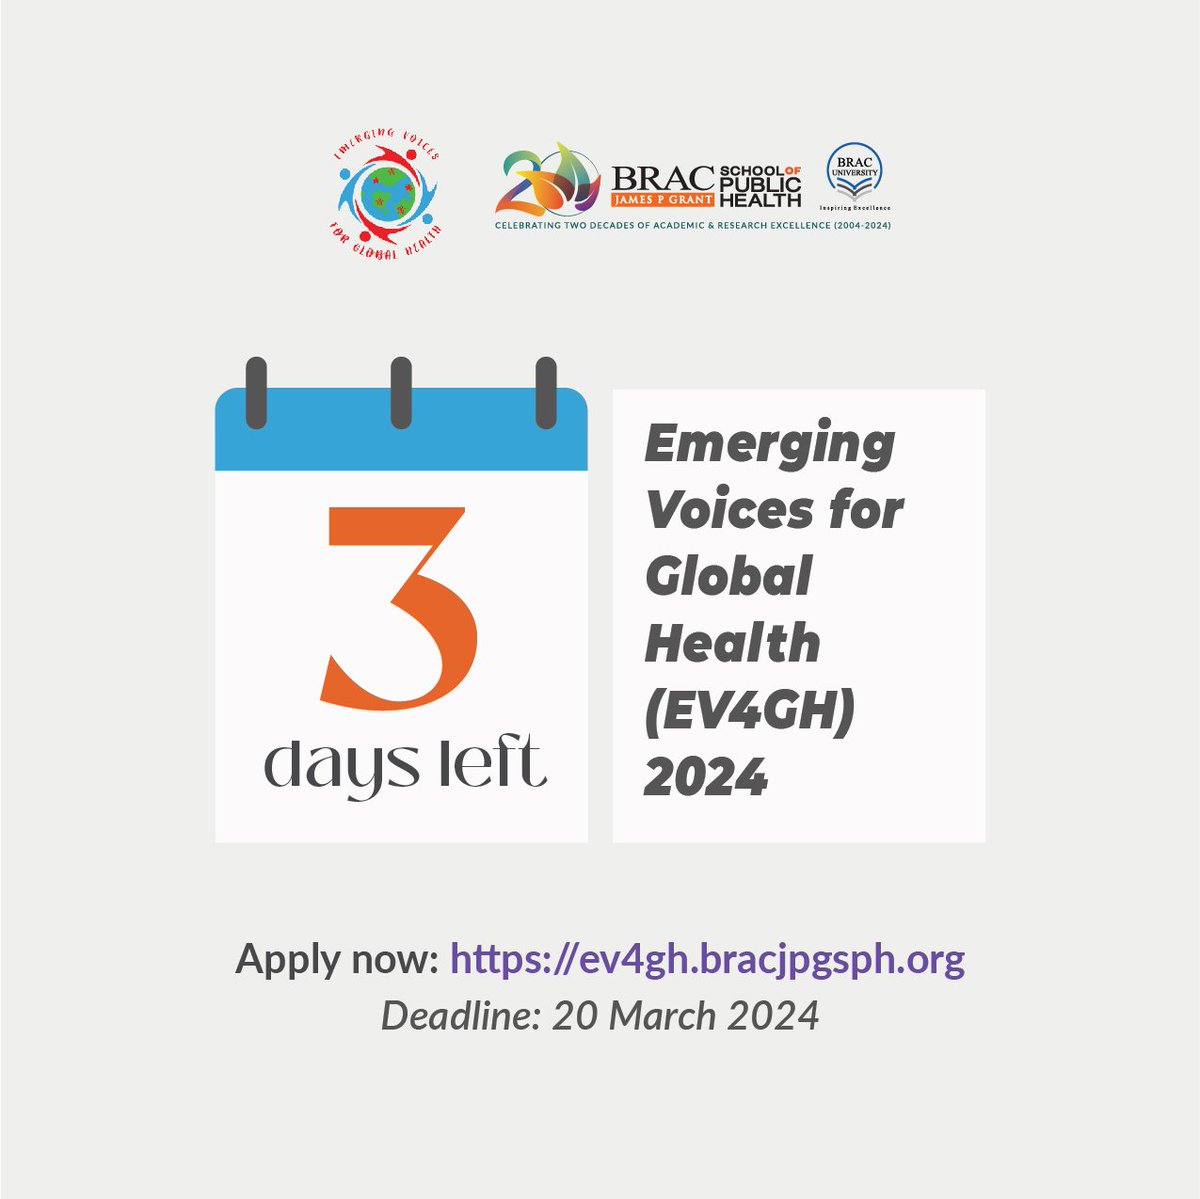 ‼️ ONLY 3 DAYS LEFT! Don't miss the chance to become a part of the next generation of #GlobalHealth #changemakers APPLY NOW: ev4gh.bracjpgsph.org Application deadline: 20 March 2024, 11:59 PM Bangladesh Standard Time (GMT+6) #EV4GH #publichealth